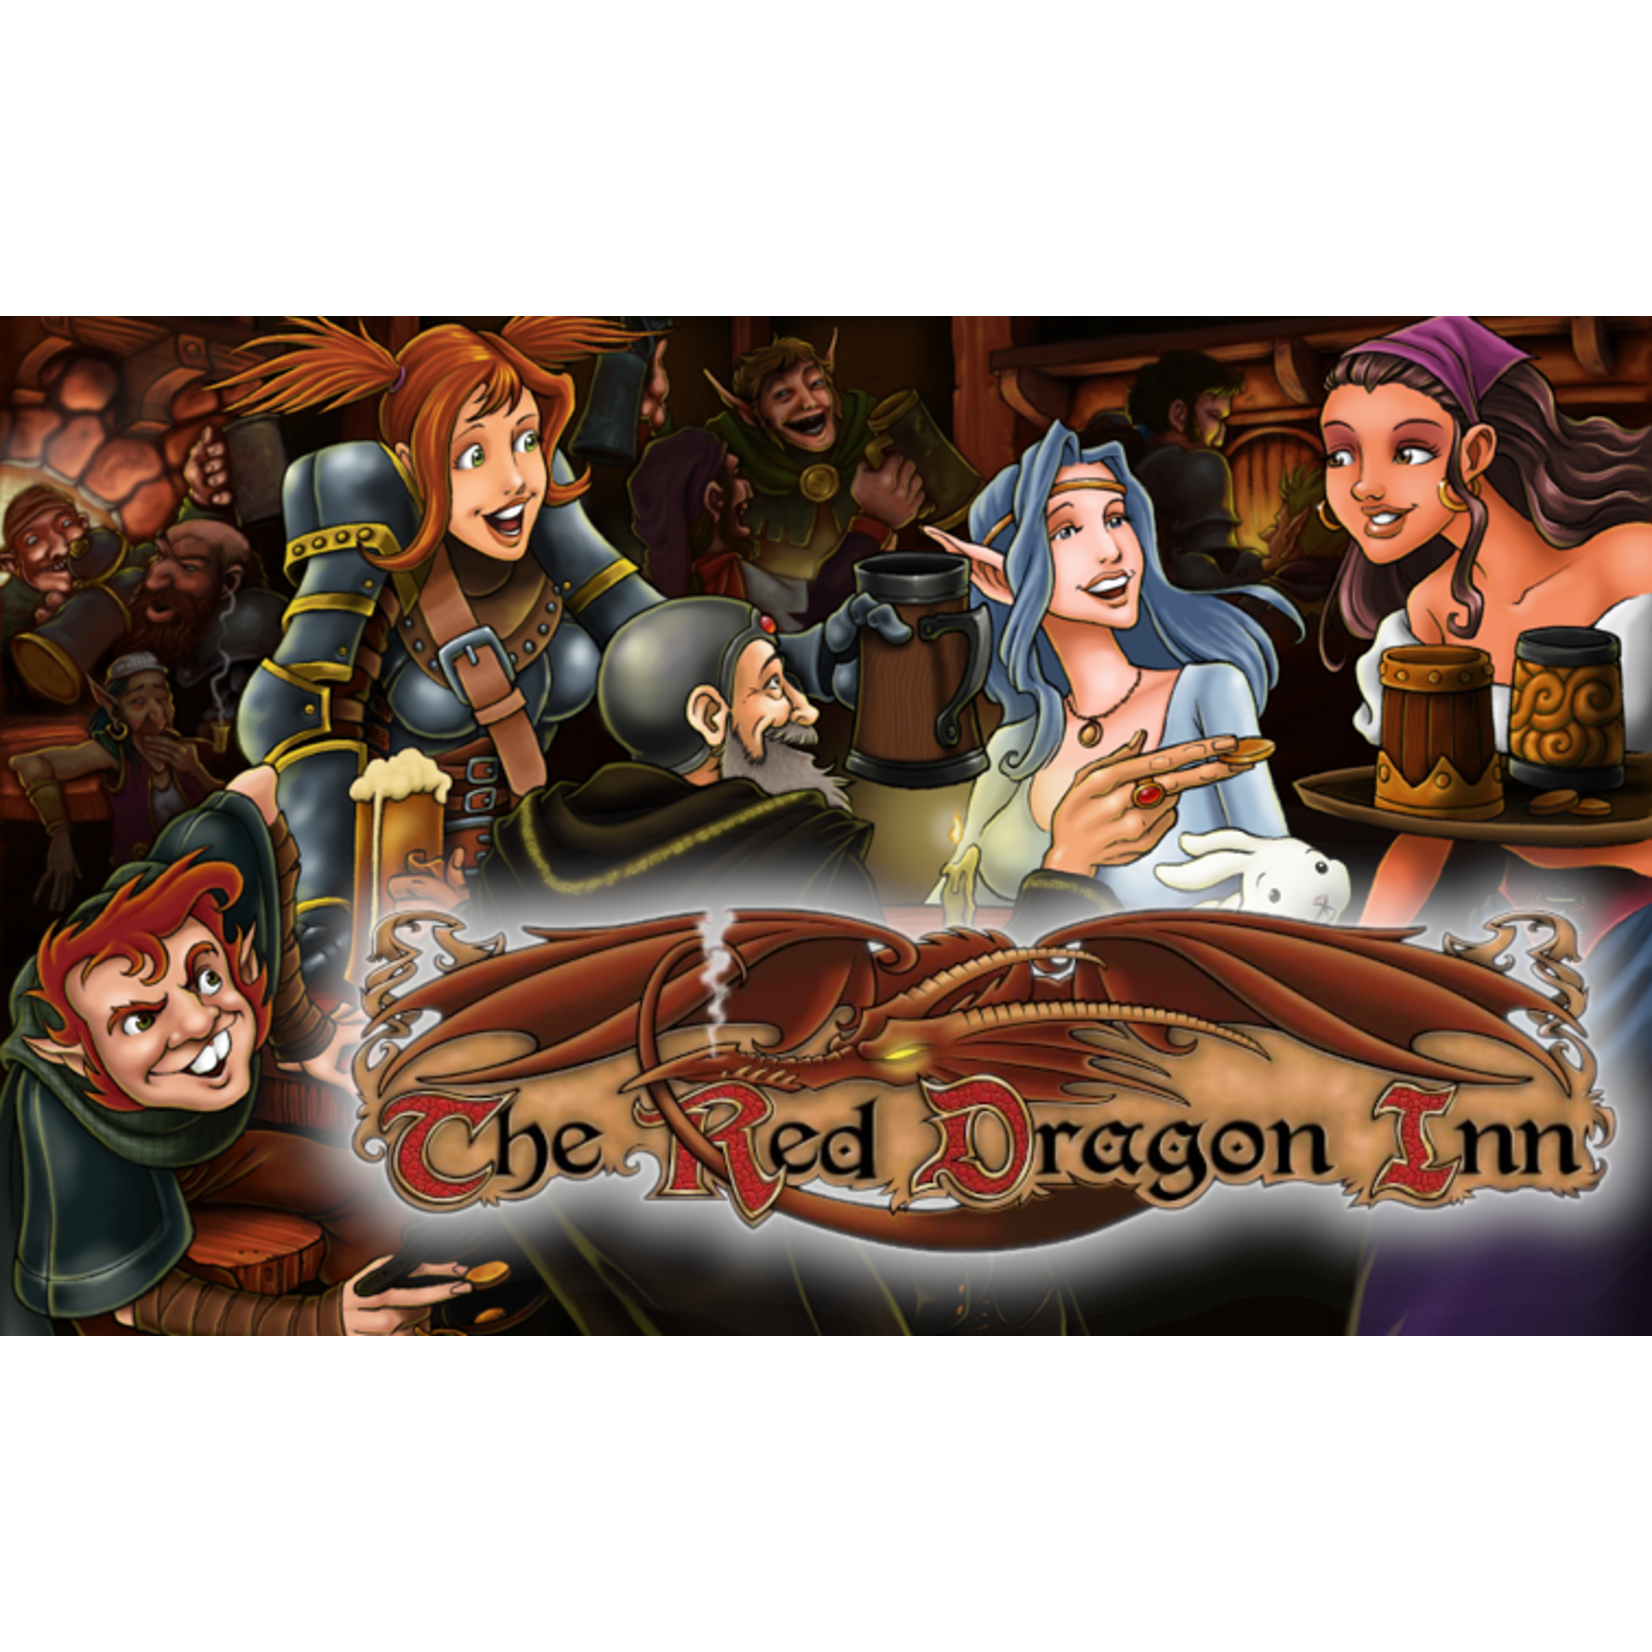 Fair Game Admission: Learn to Play The Red Dragon Inn (5-7 PM, LG, August 27)